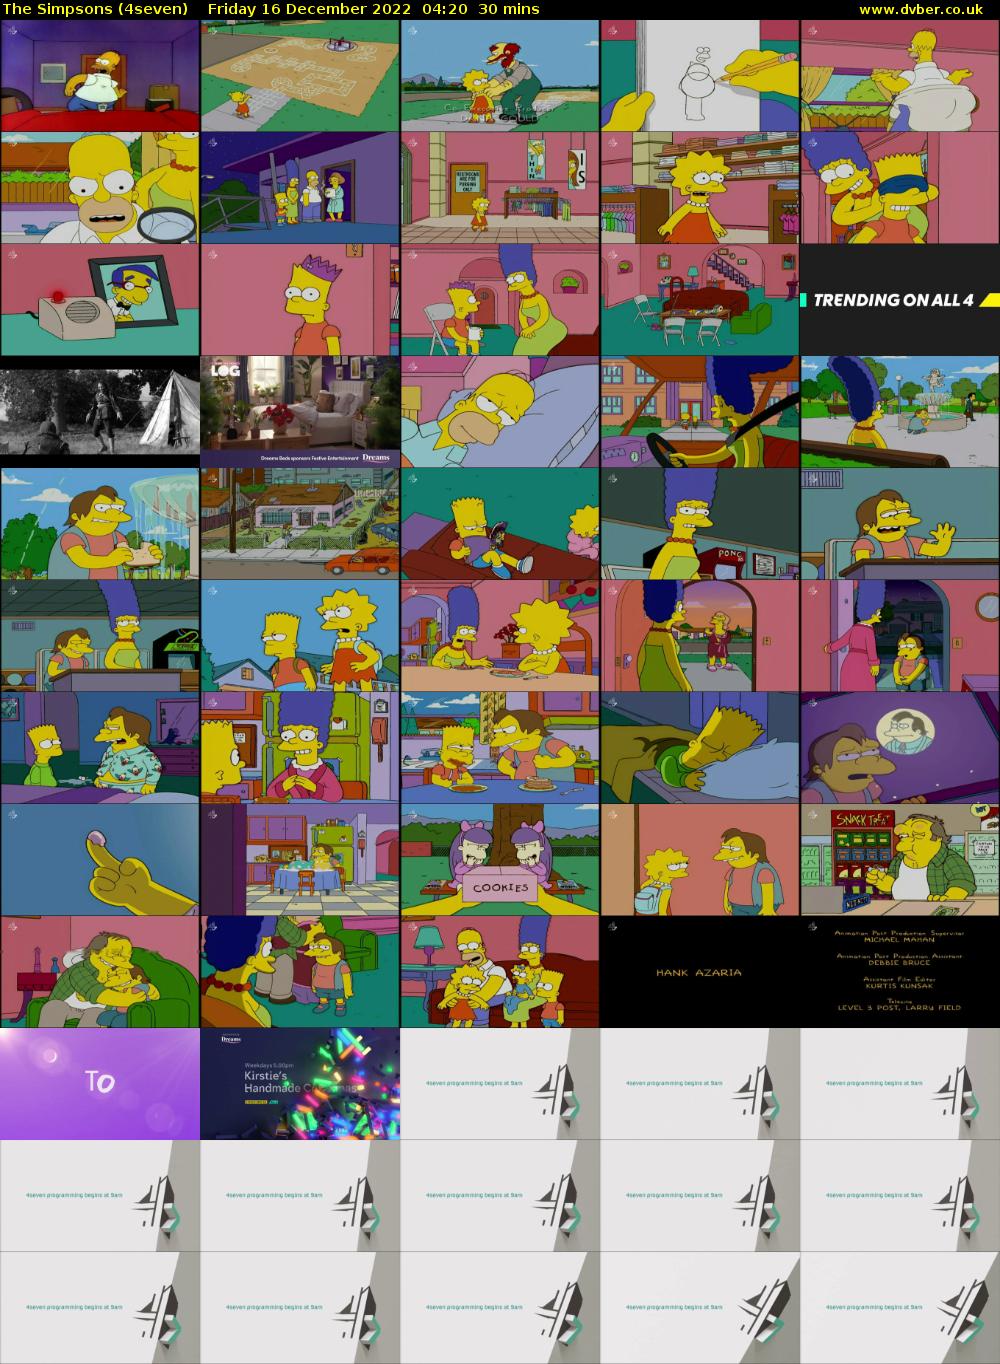 The Simpsons (4seven) Friday 16 December 2022 04:20 - 04:50